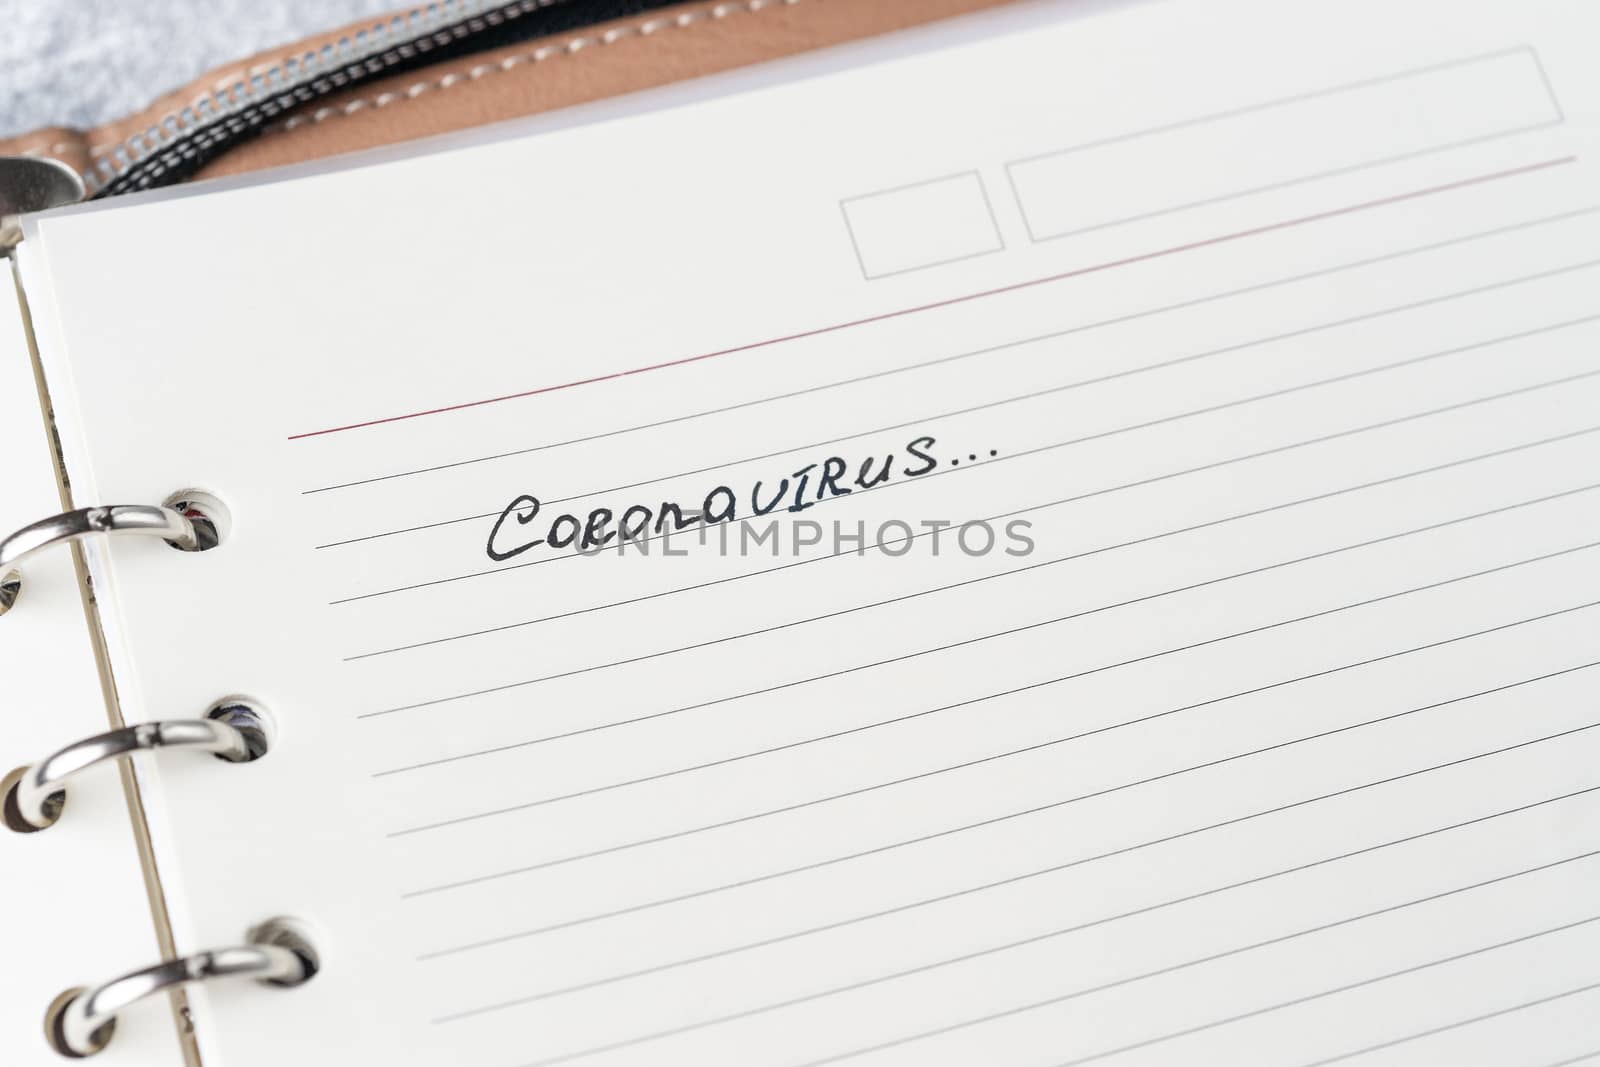 Coronavirus Covid-19 text hand-written on empty sheet in a daily by alexsdriver